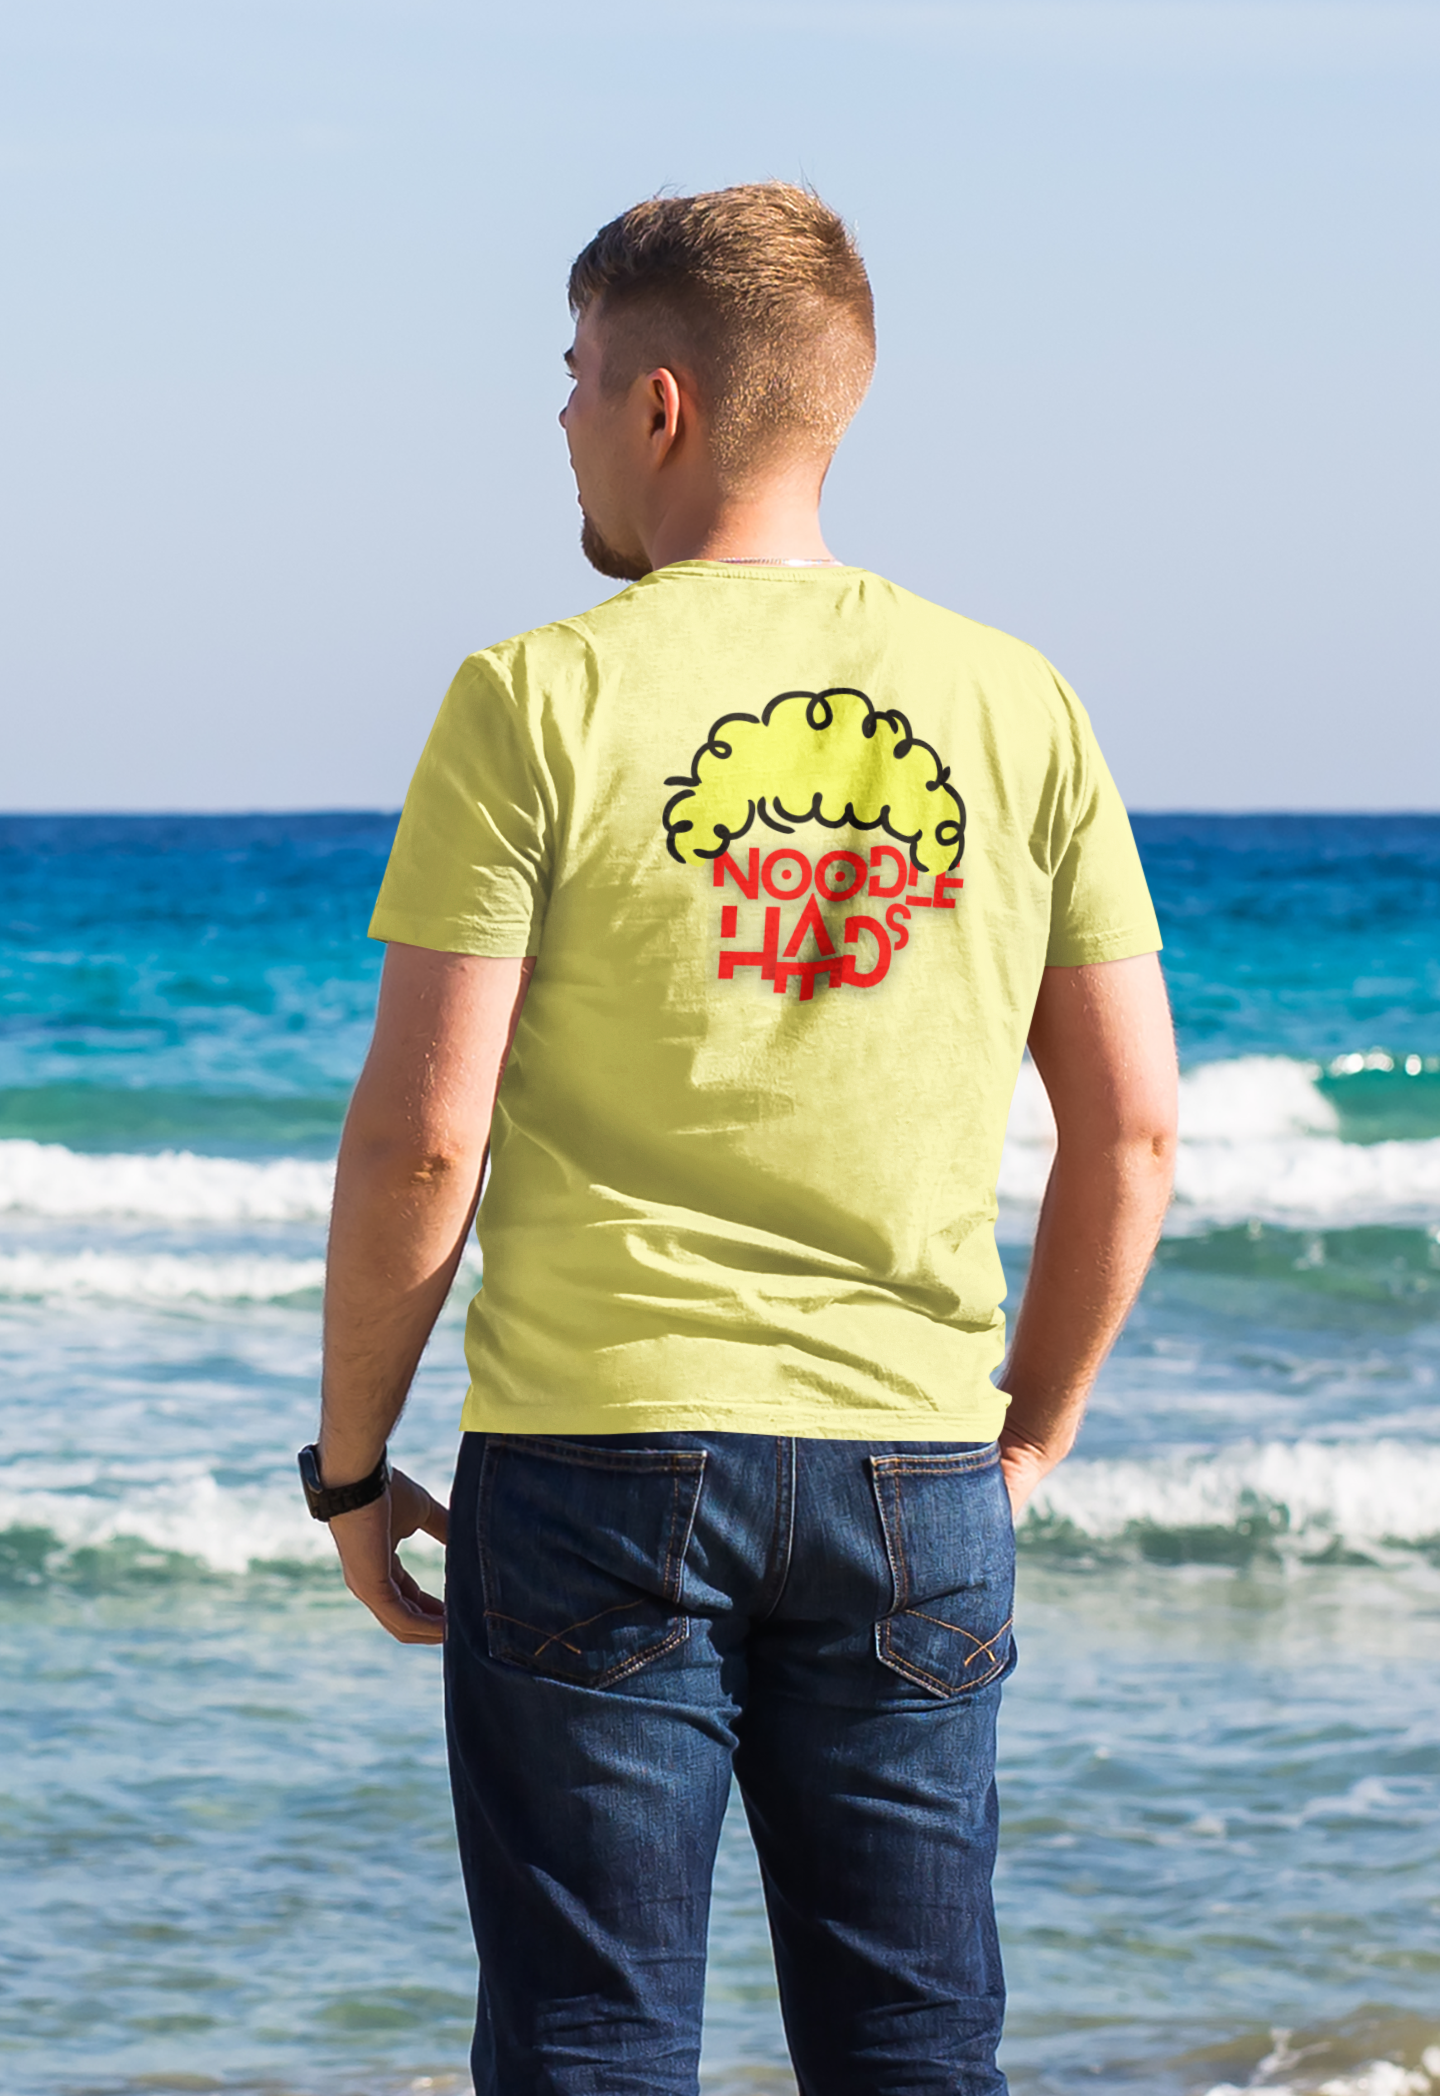 Butter Yellow Men's Tshirt - The Noodle Heads - Back Print